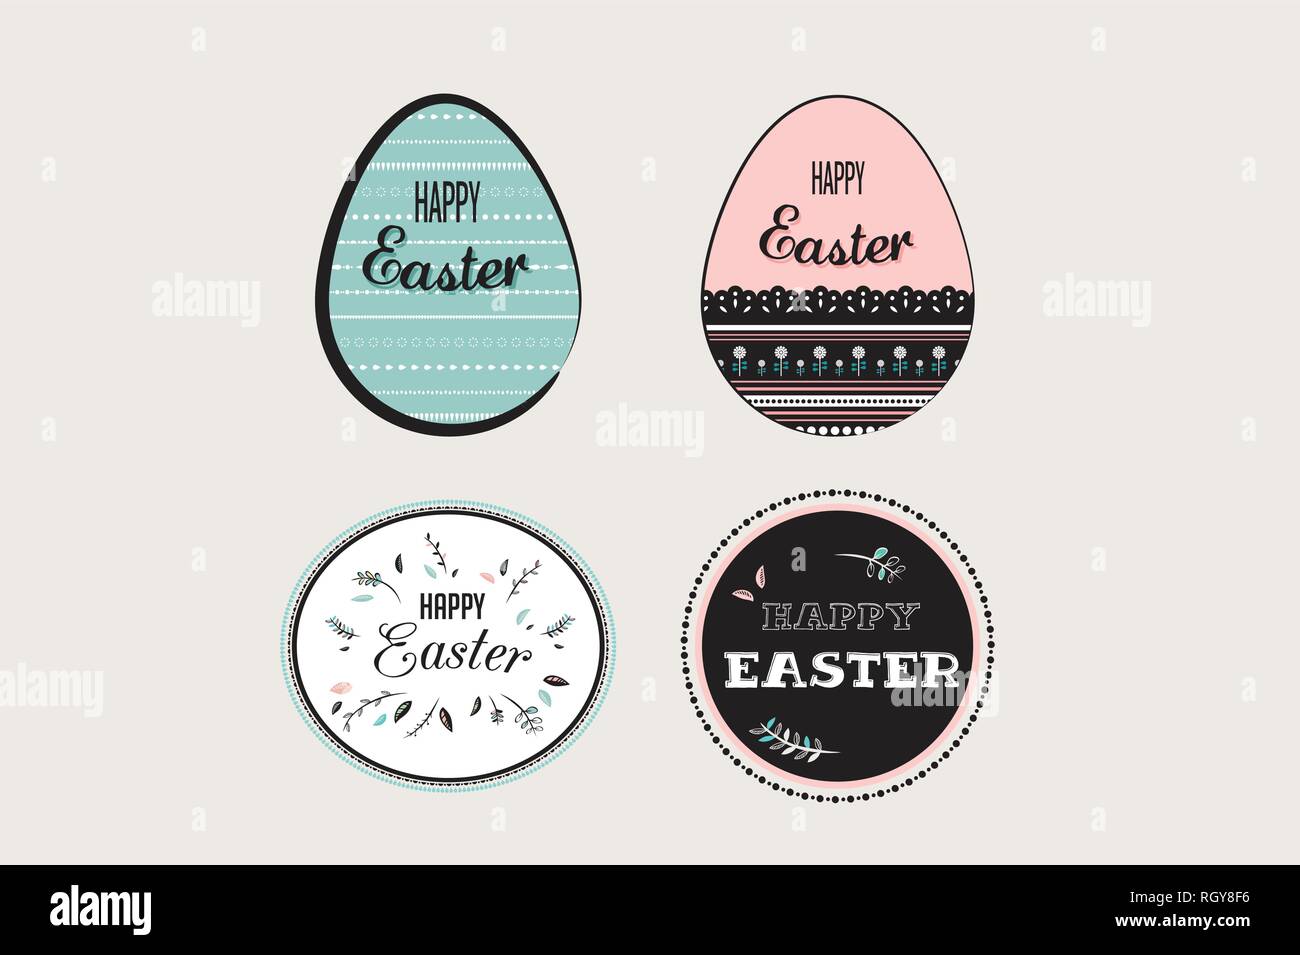 Easter elements with decorated egg and floral emblems. Stock Vector